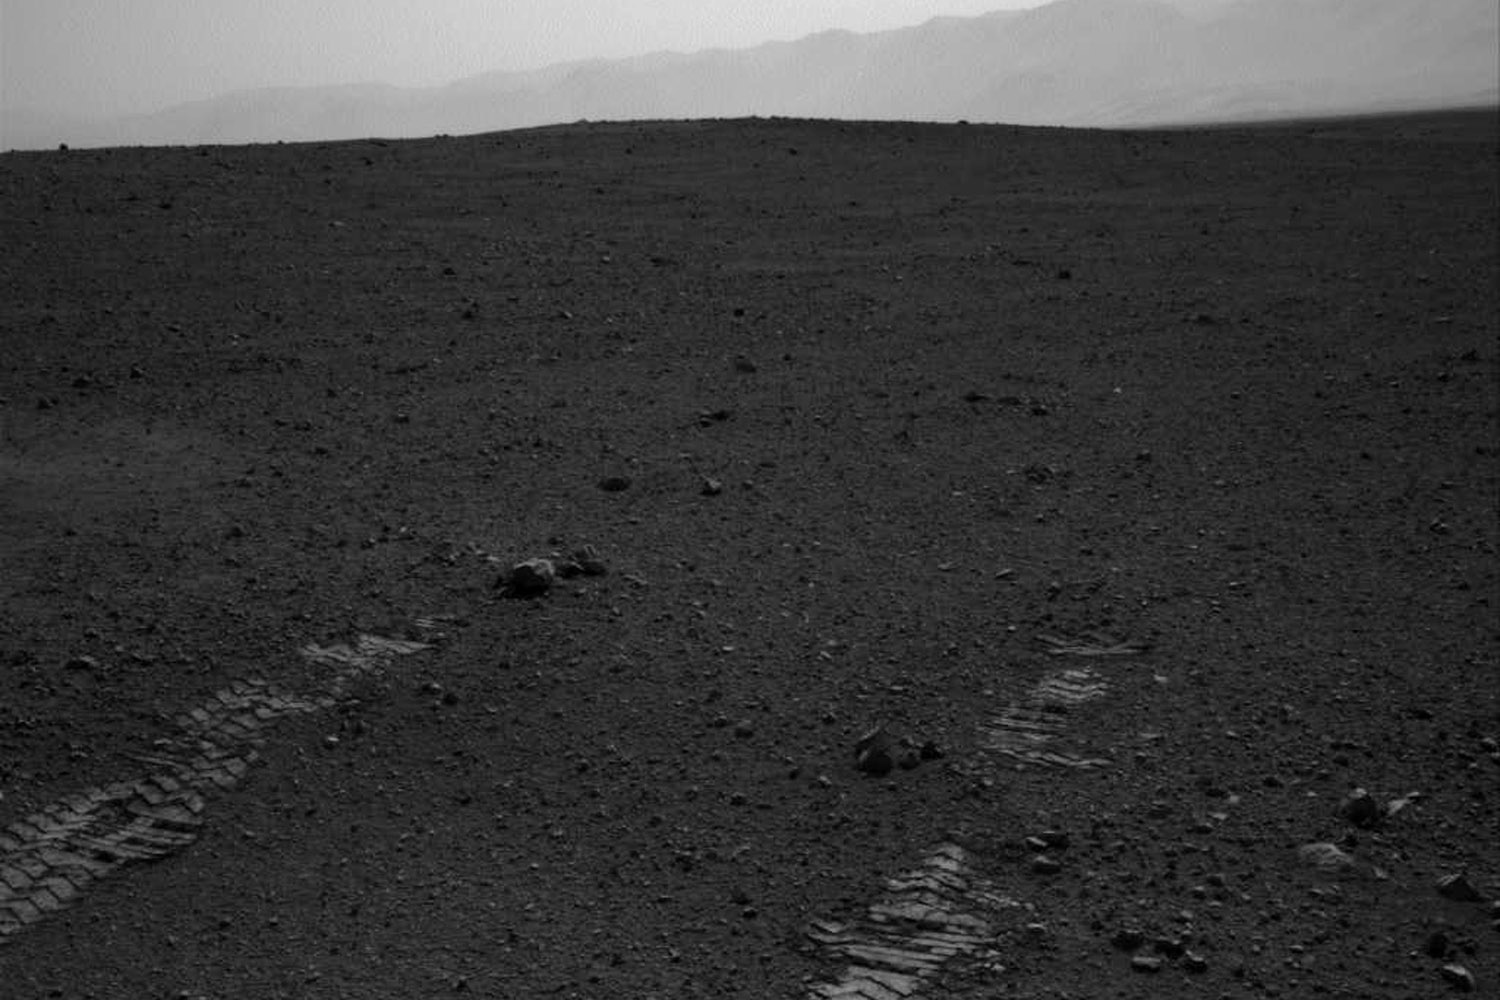 Aug. 22, 2012. This image shows the tracks left by NASA's Curiosity rover as it completed its first test drive on Mars.